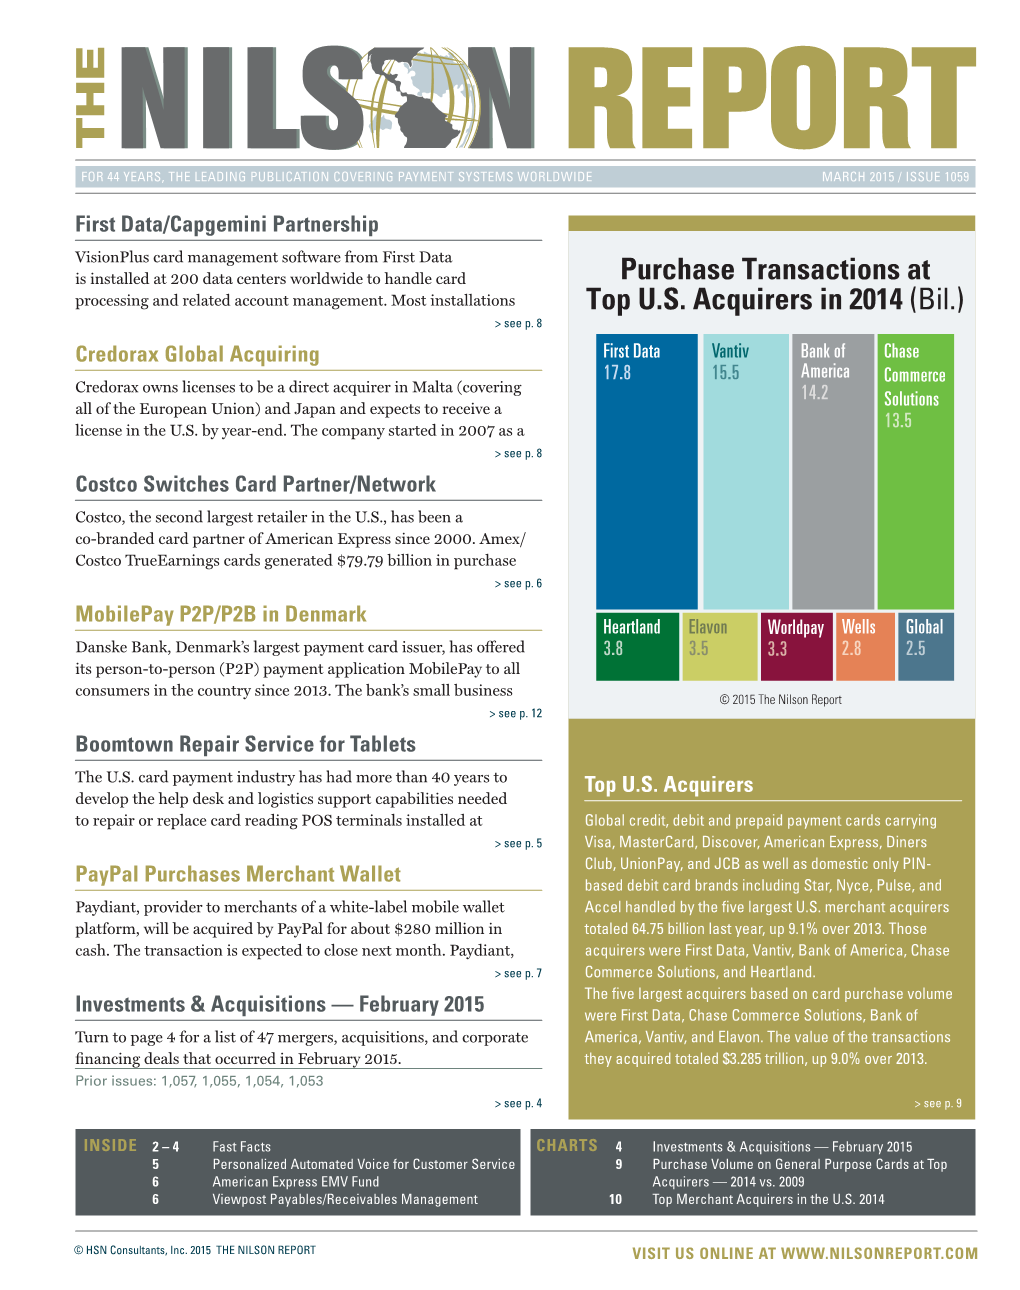 Purchase Transactions at Top U.S. Acquirers in 2014 (Bil.)